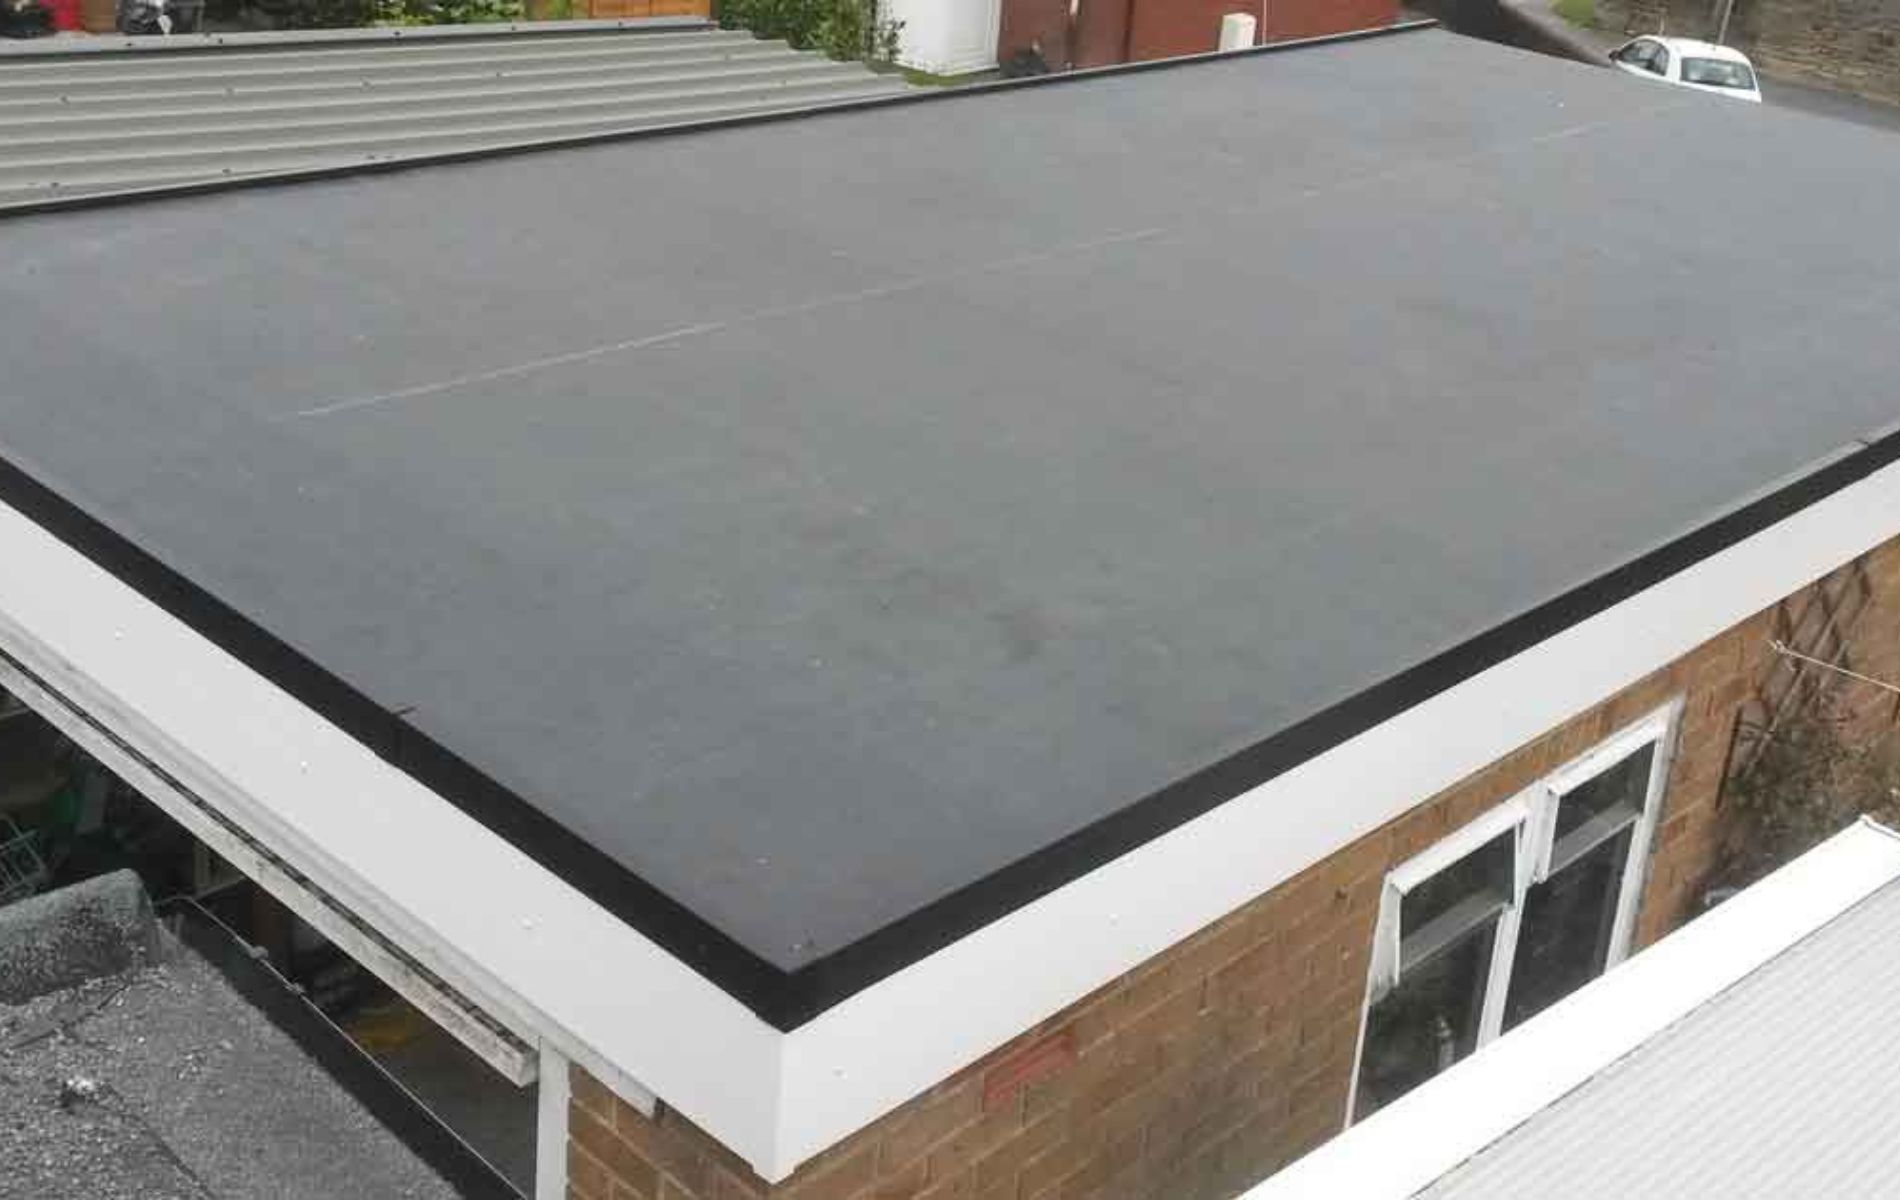 Rubber Flat Roof Pros and Cons